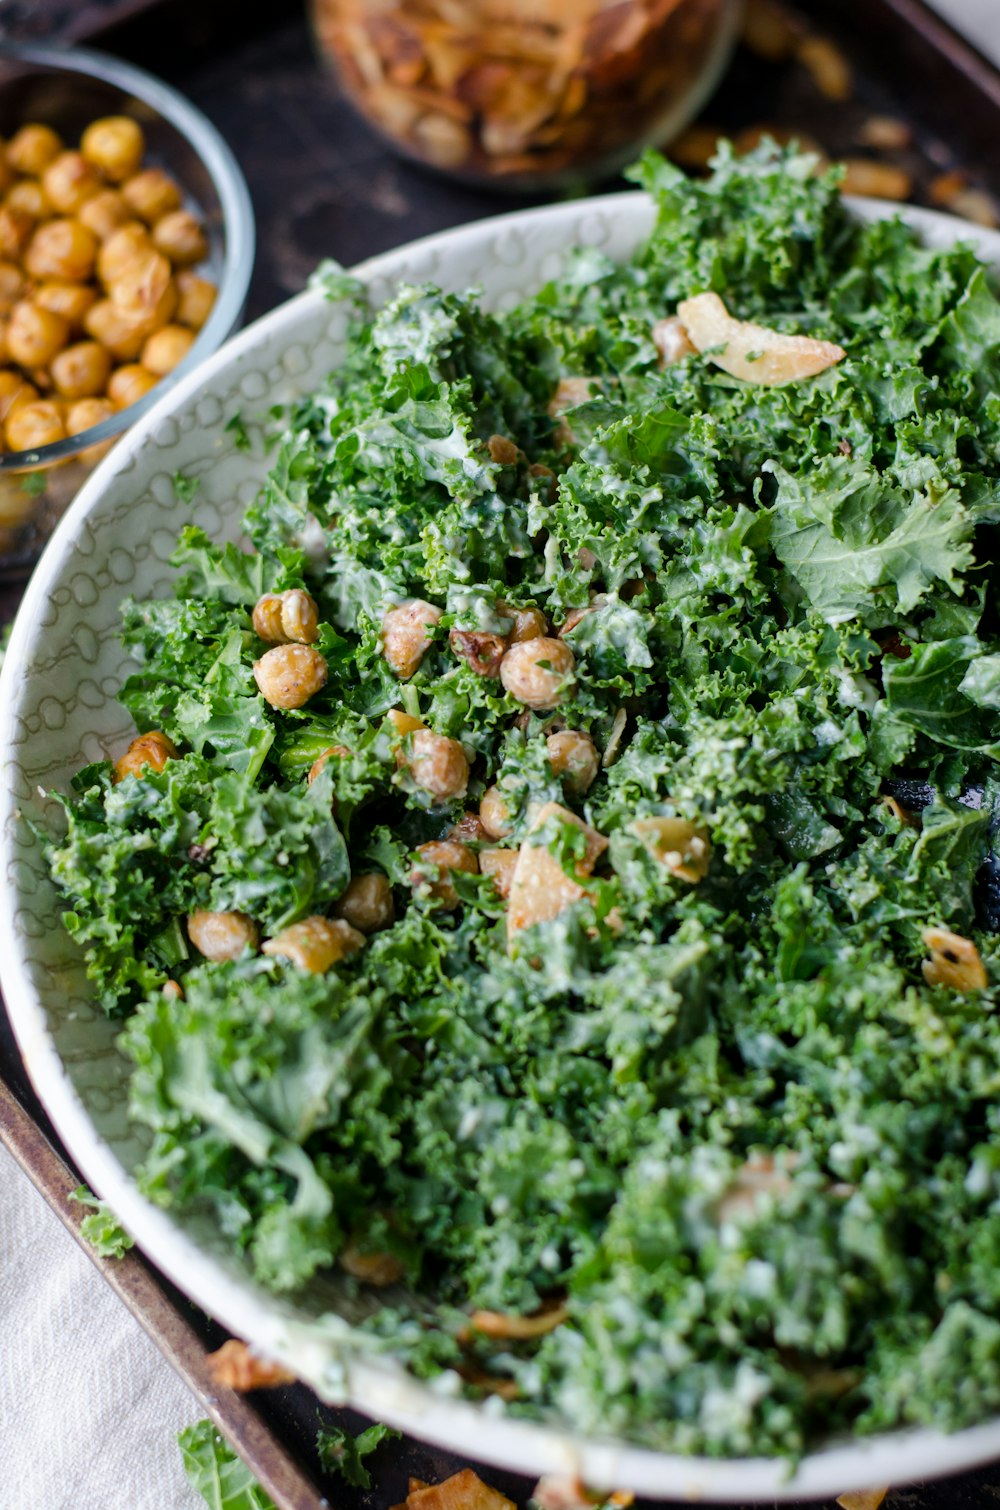 nuts and parsley in a bowl photo by Unsplash